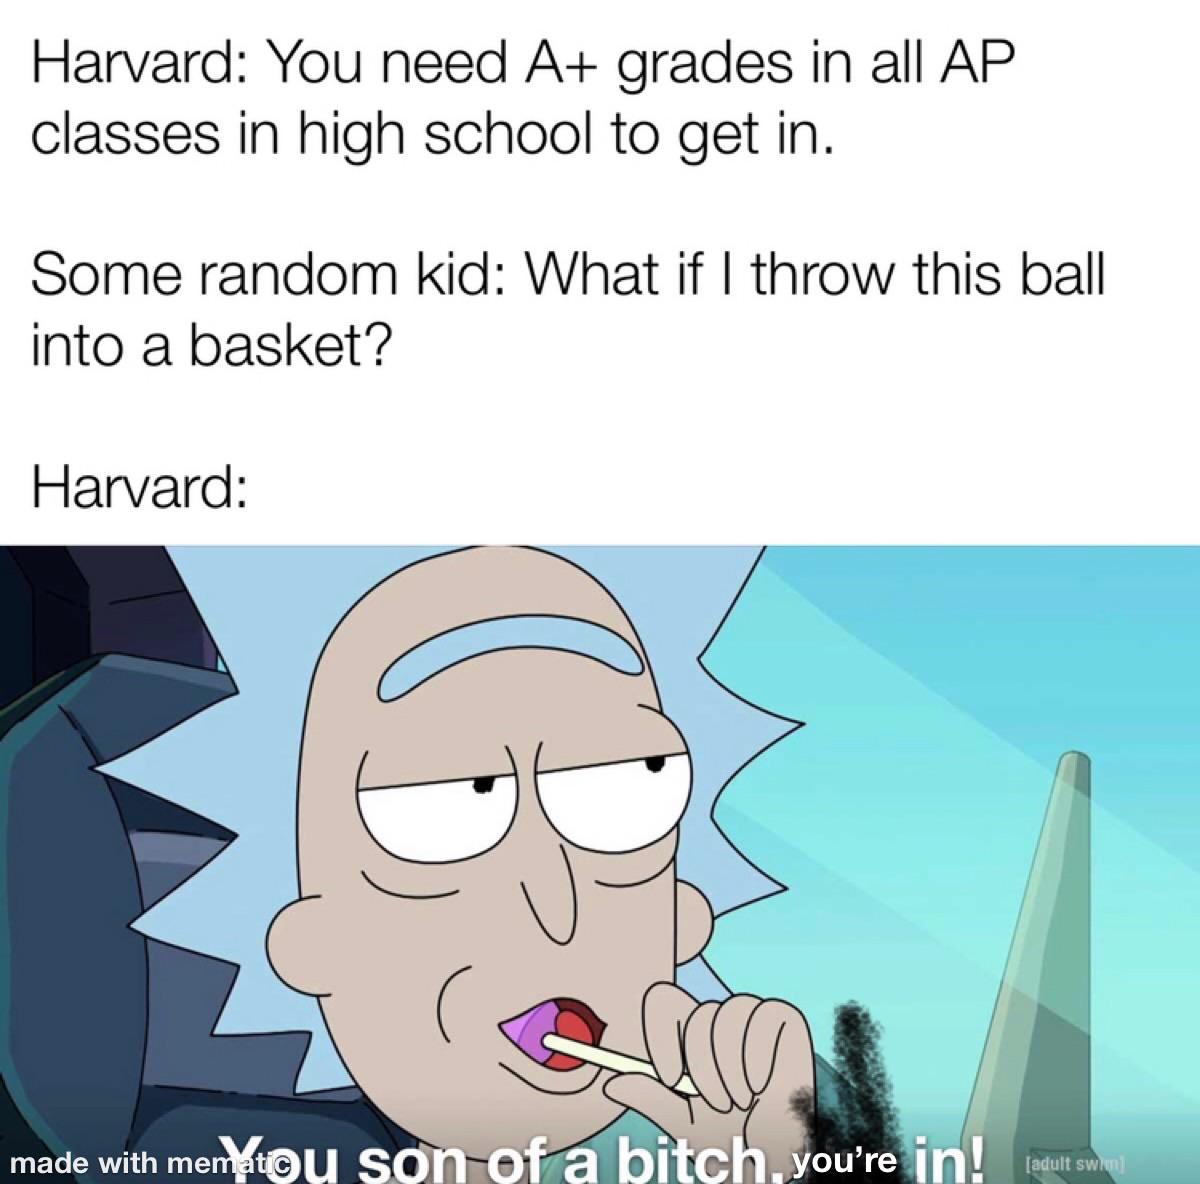 Funny, Harvard, Ivy League, GPA, Paint, North Carolina other memes Funny, Harvard, Ivy League, GPA, Paint, North Carolina text: Harvard: You need A+ grades in all AP classes in high school to get in. Some random kid: What if I throw this ball into a basket? Harvard: 0 made with me you're (adult sw I 